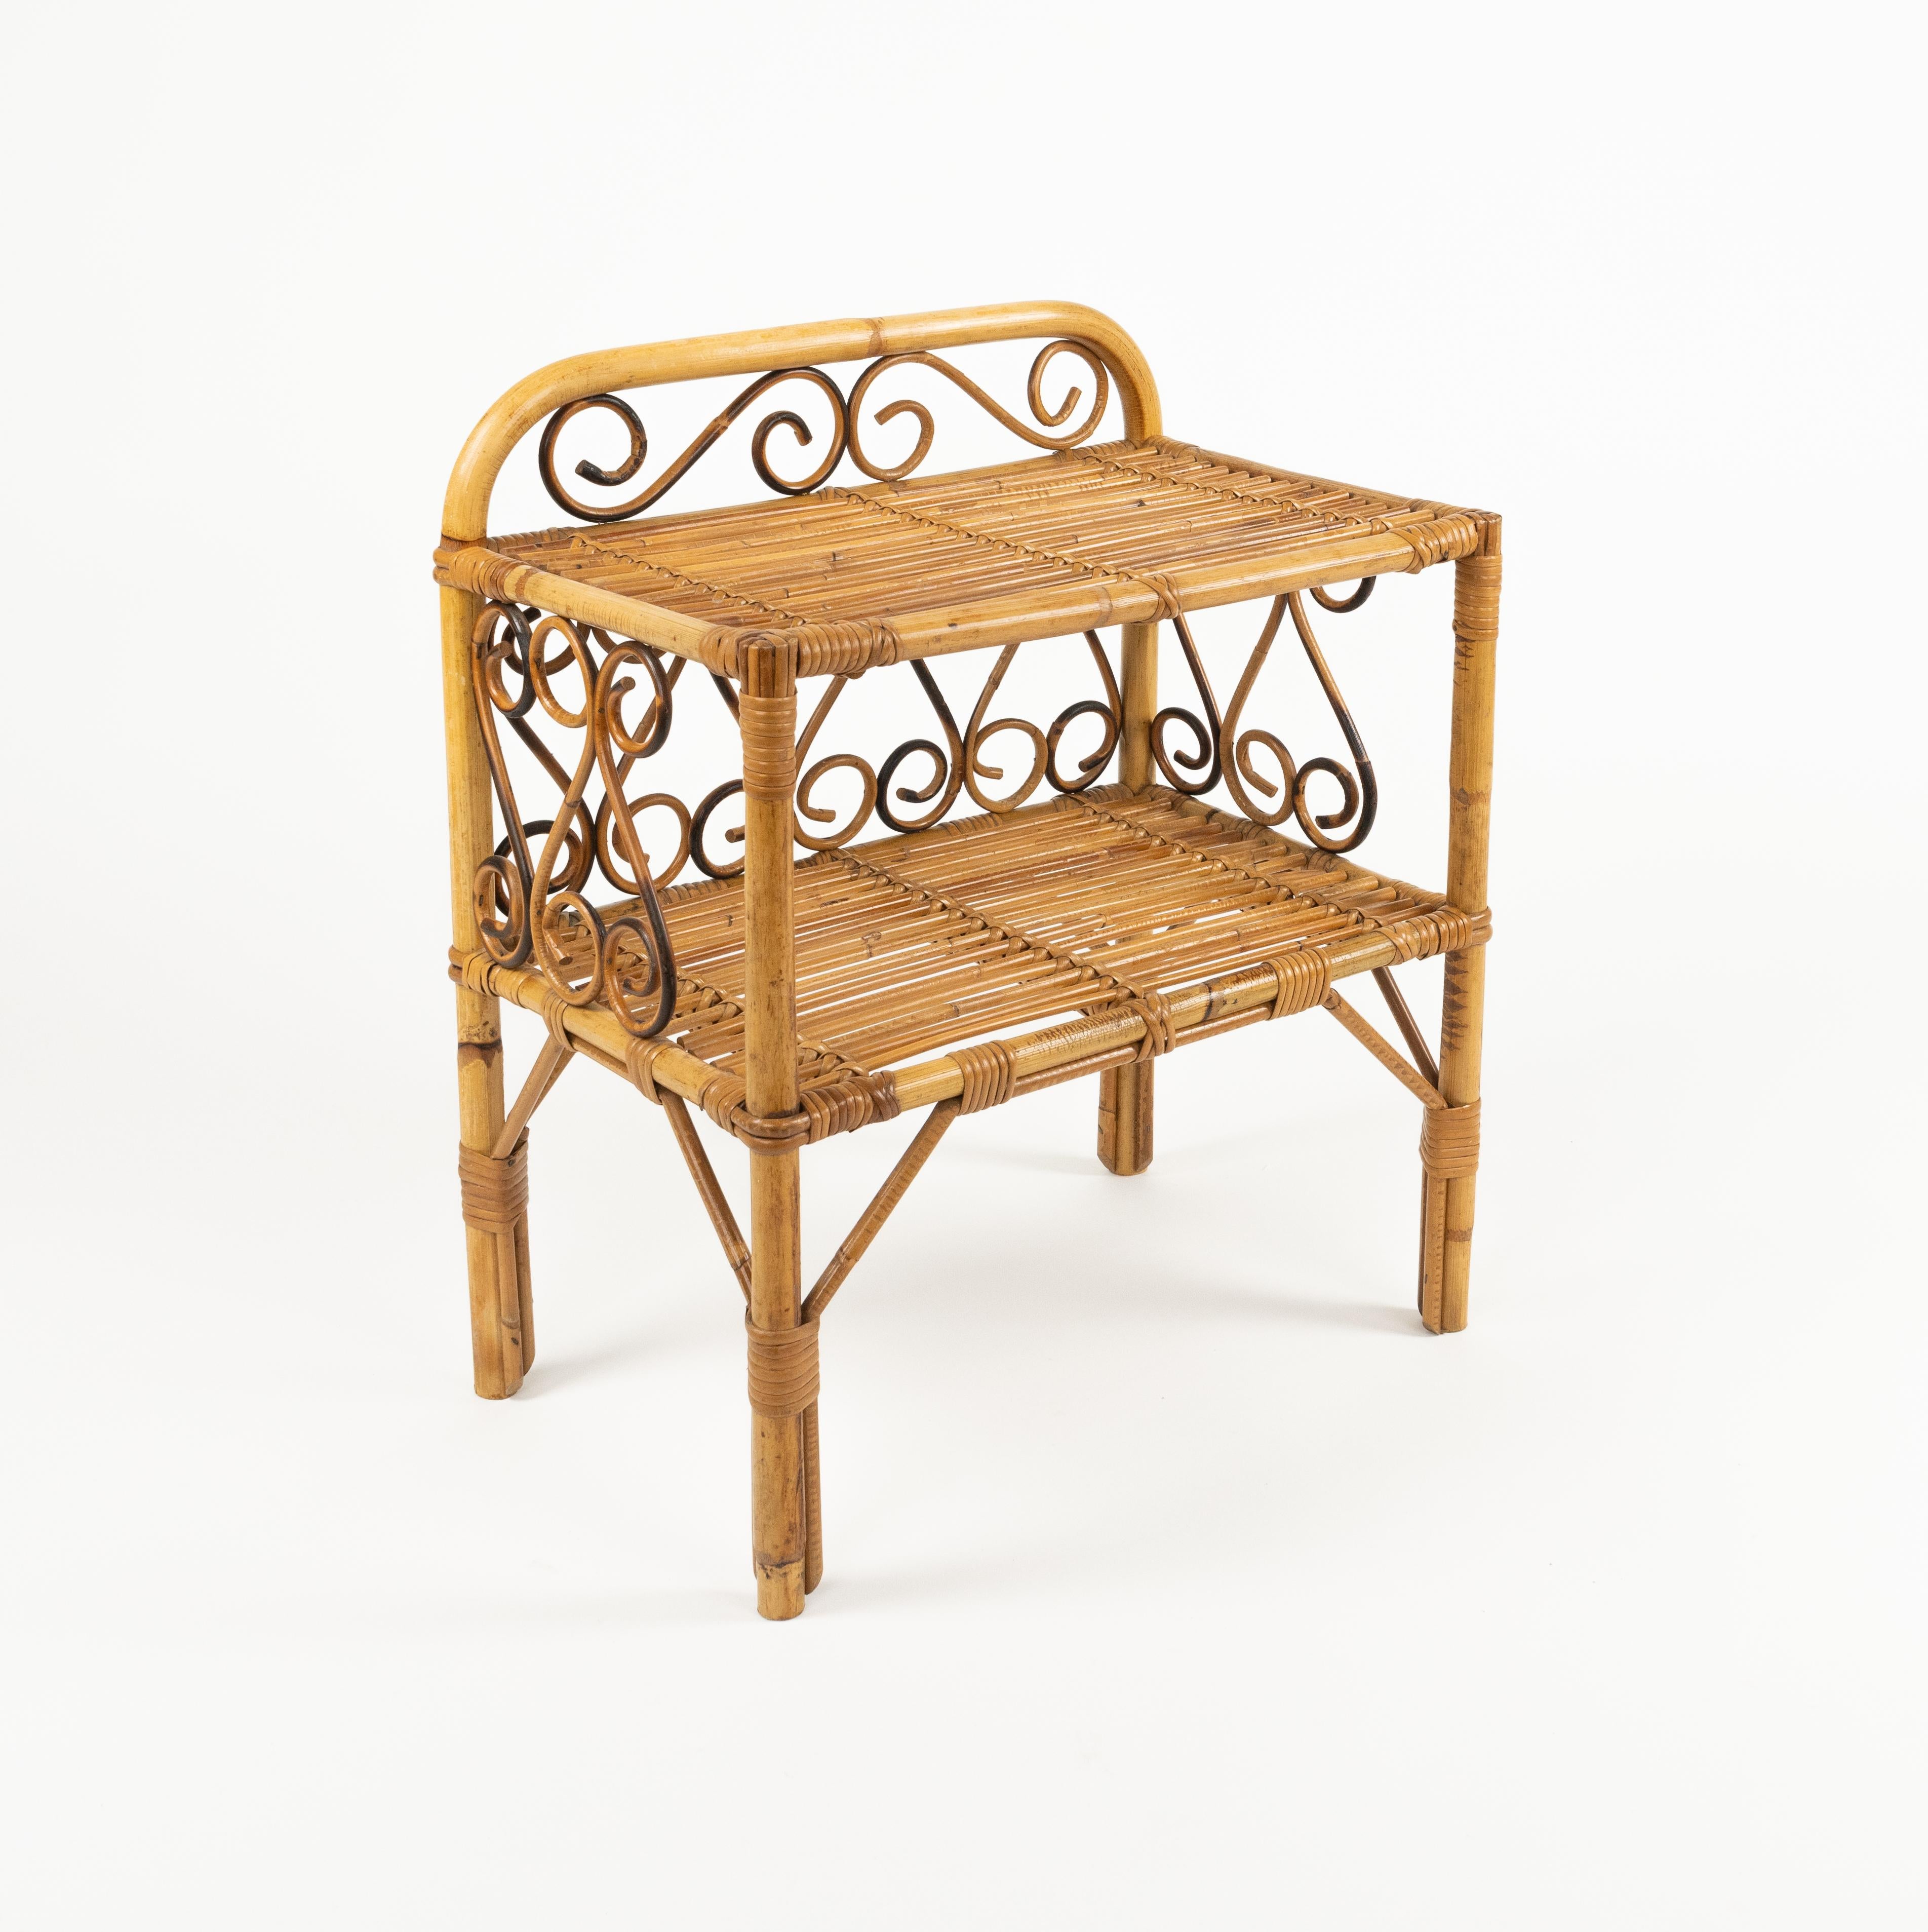 Midcentury amazing side table in rattan and bamboo in the style of Franco Albini.

These stunning bedsides feature a structure made in bamboo with rattan decorations on the sides.

Made in Italy in the 1960s.